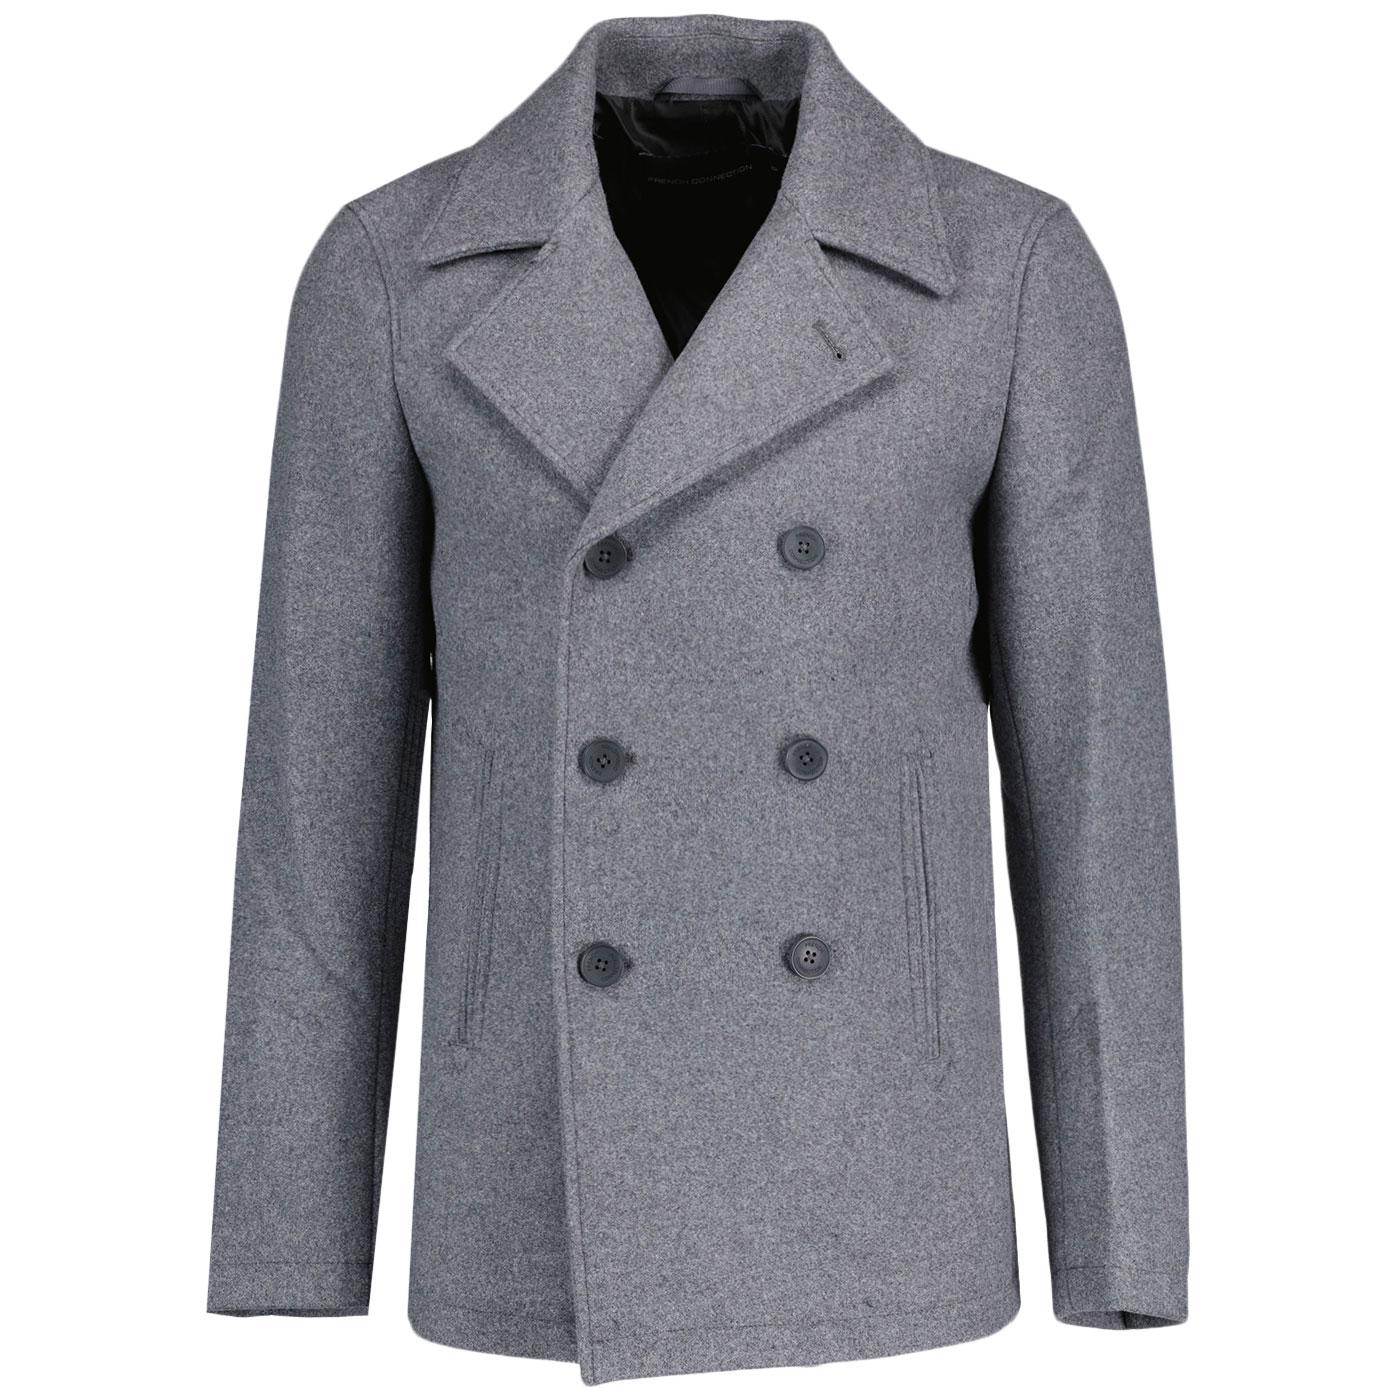 French Connection Double Breasted Mod Peacoat in Light Grey